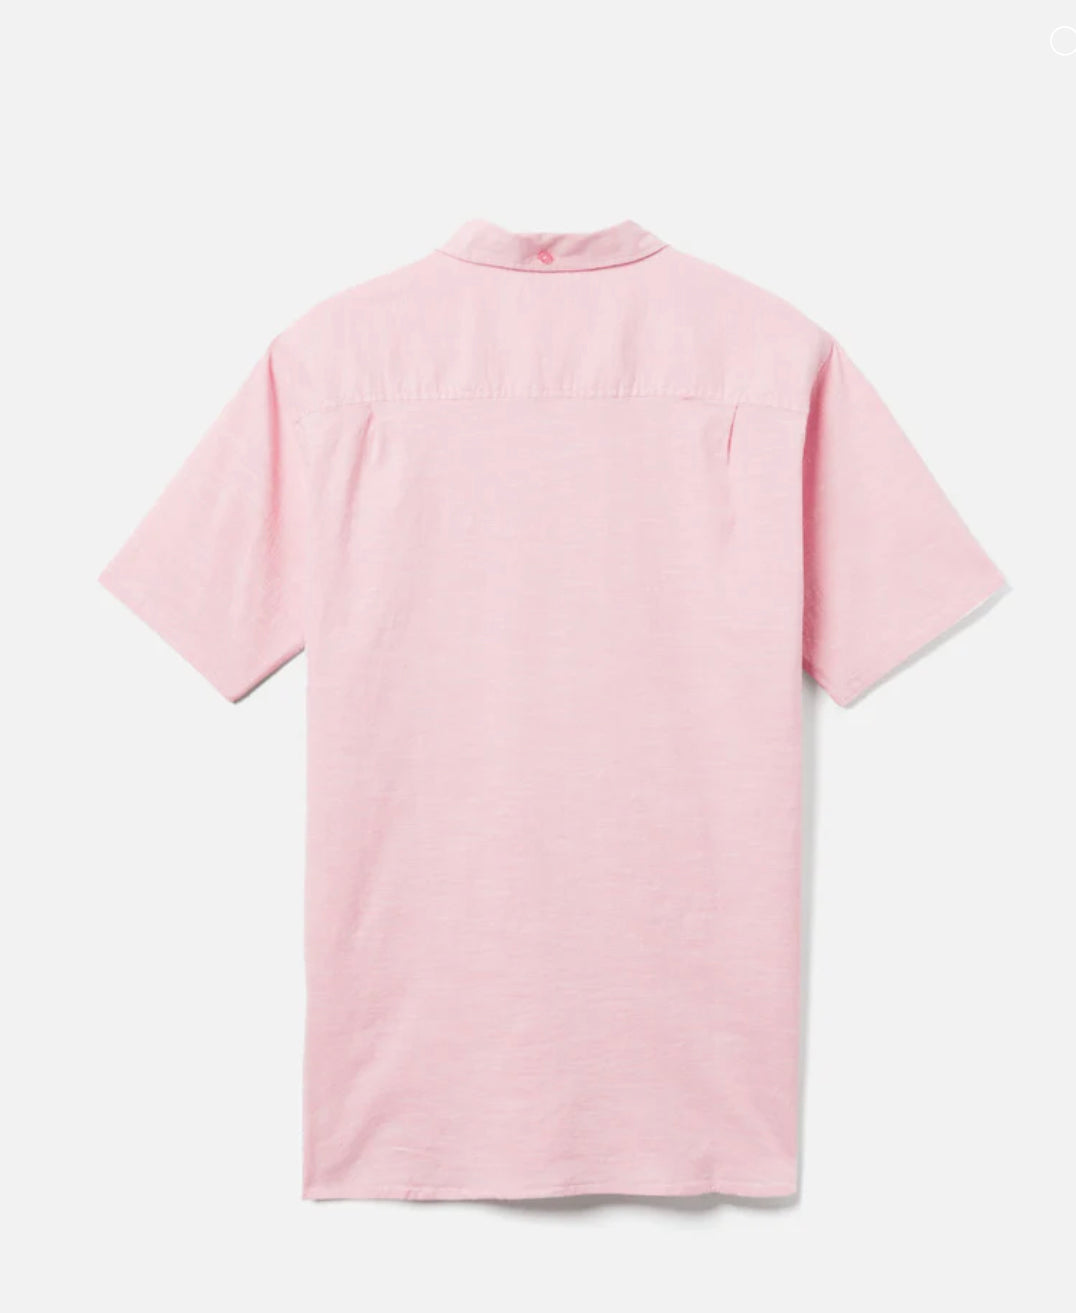 The Hurley One and Only Short Sleeve Stretch Shirt is perfect for any occasion. Crafted from a cotton spandex blend, it has a slightly stretchy construction for added comfort.